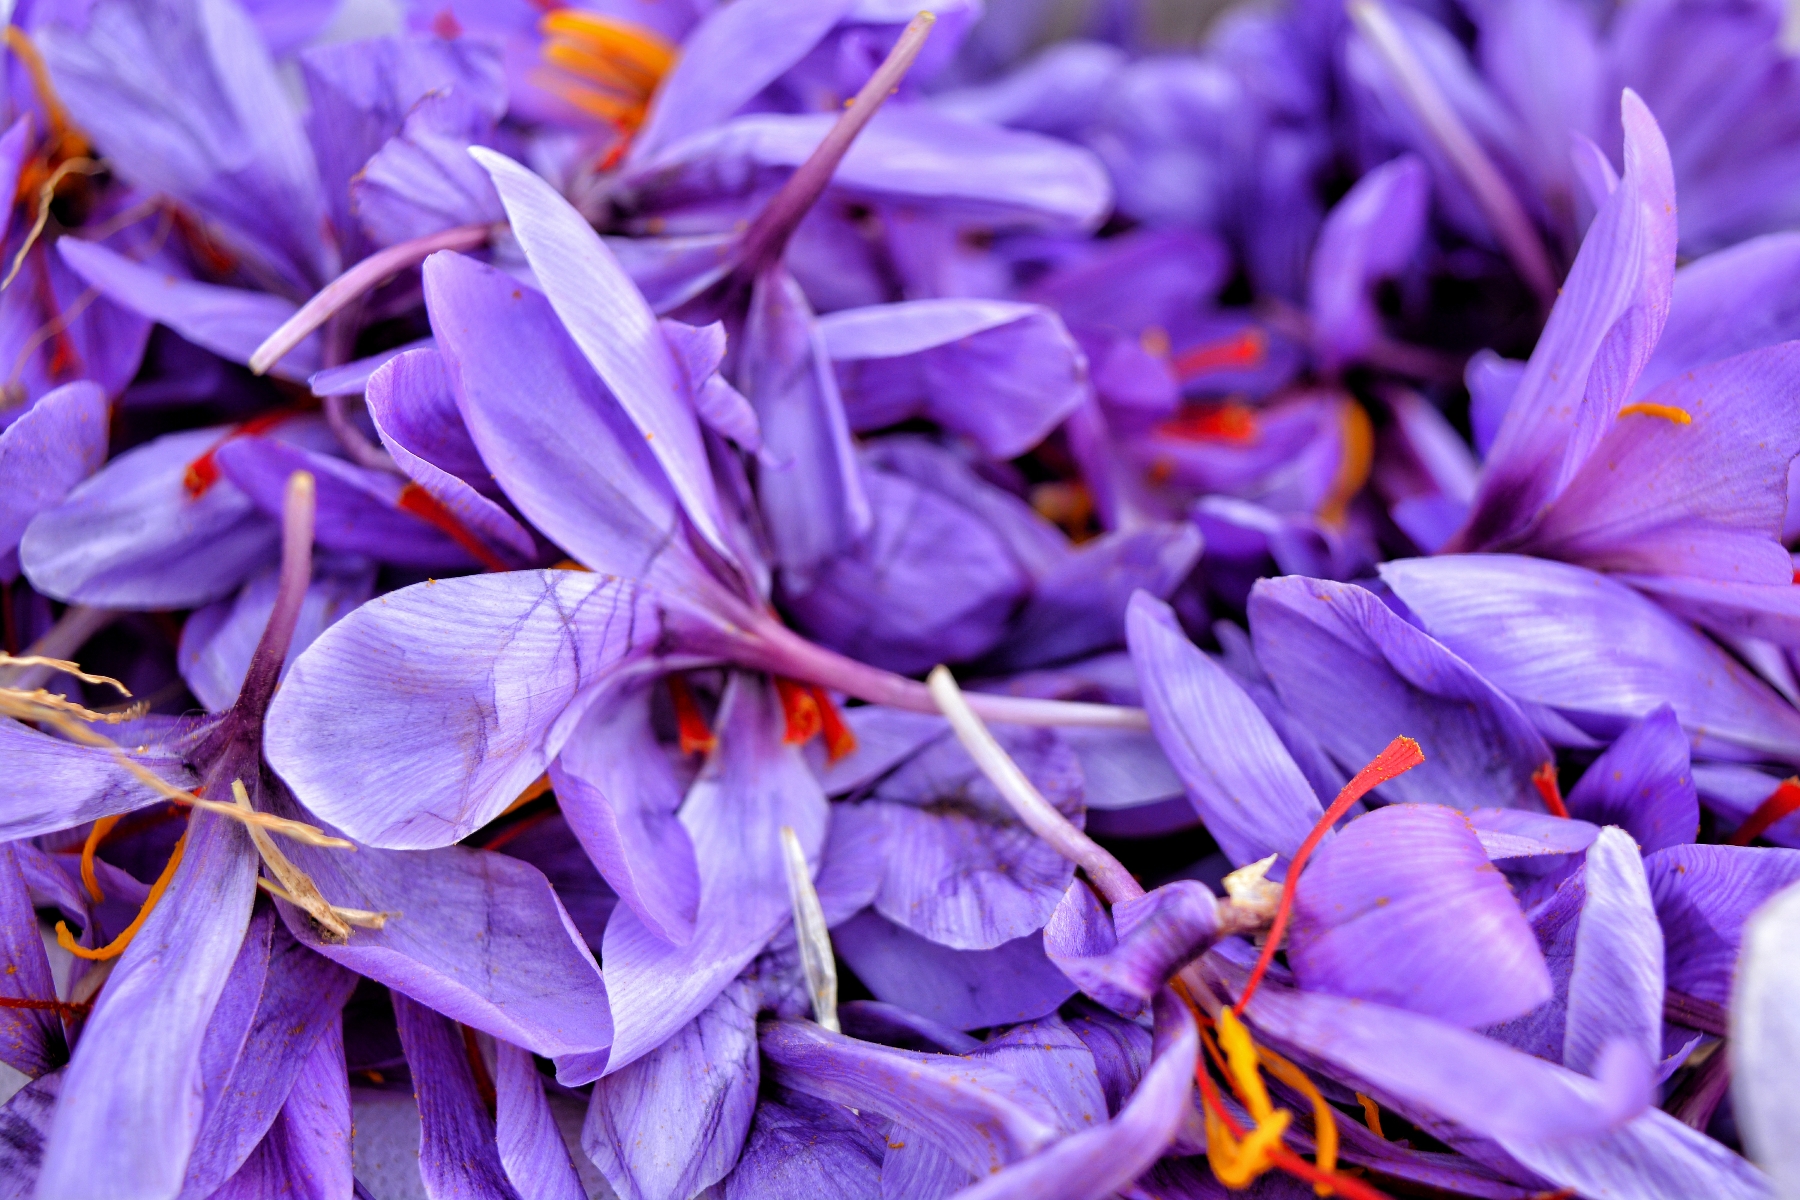 Recently harvested saffron flowers. Image By: Qazi Wasif